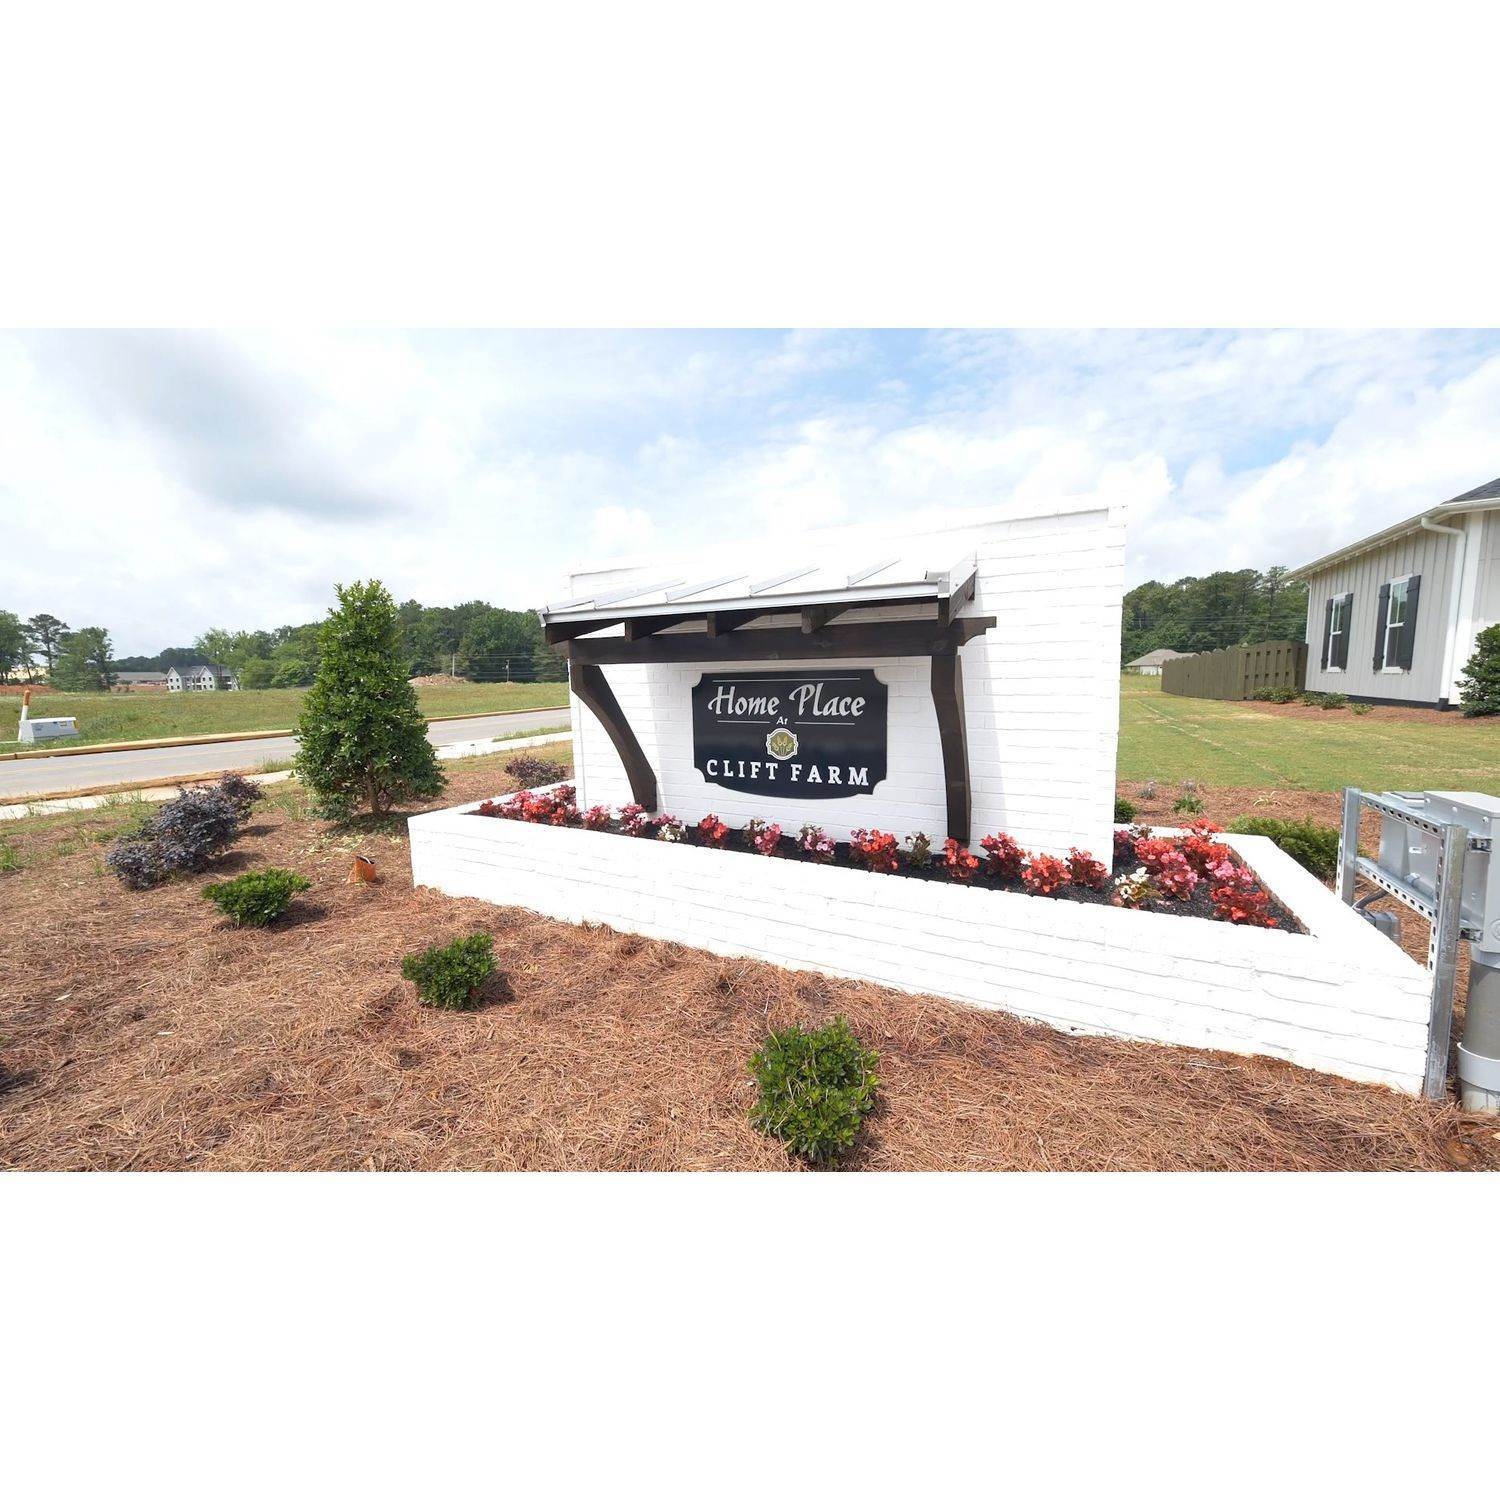 4. 300 Clift Home Place Drive, Madison, AL 35757에 Clift Farm - Single Family Homes 건물